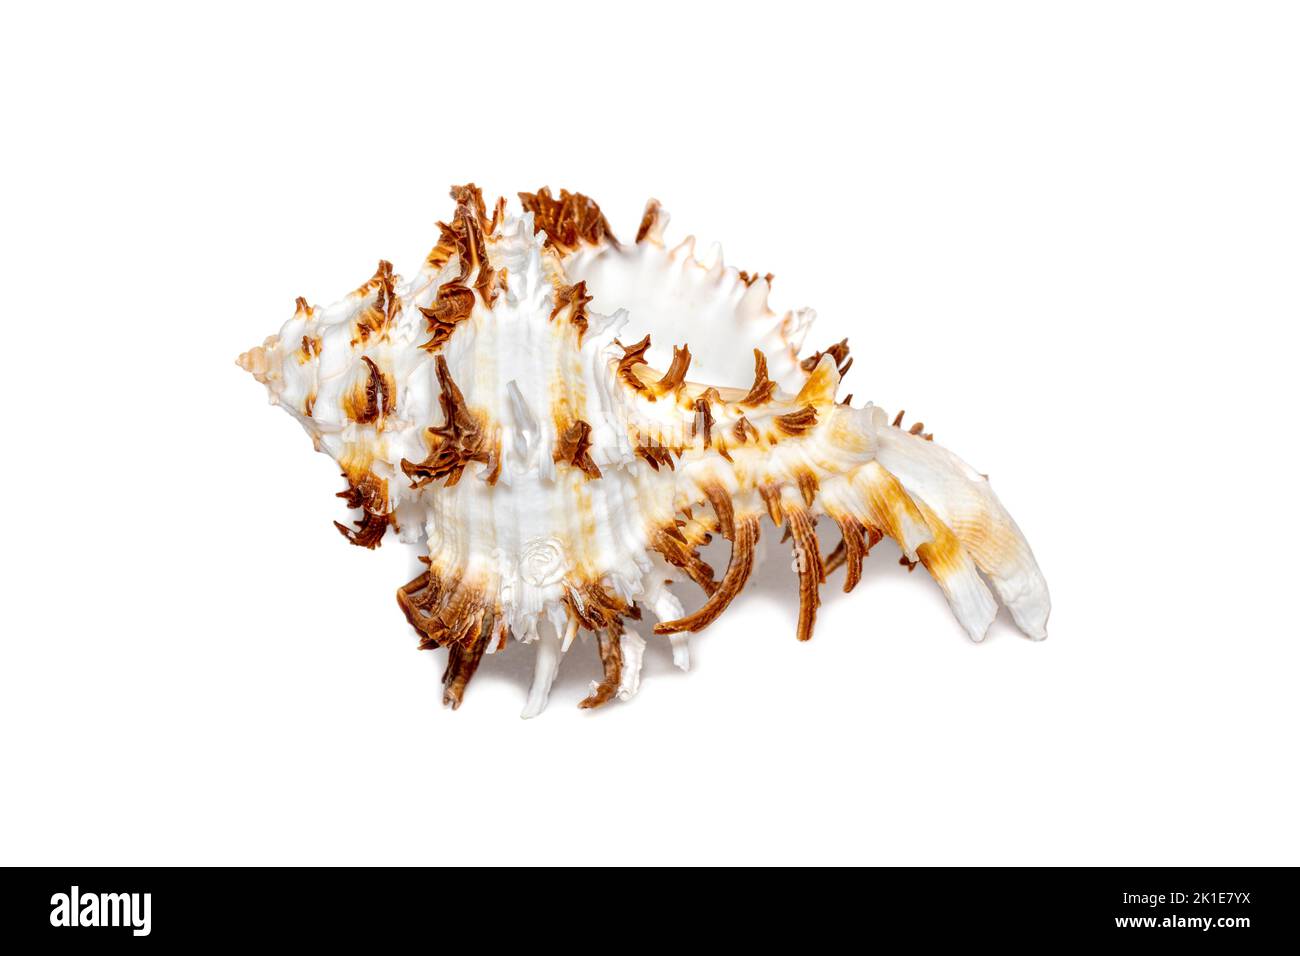 Image of chicoreus ramosus seashell common name the ramose murex or branched murex on a white background. Sea shells. Undersea Animals. Stock Photo